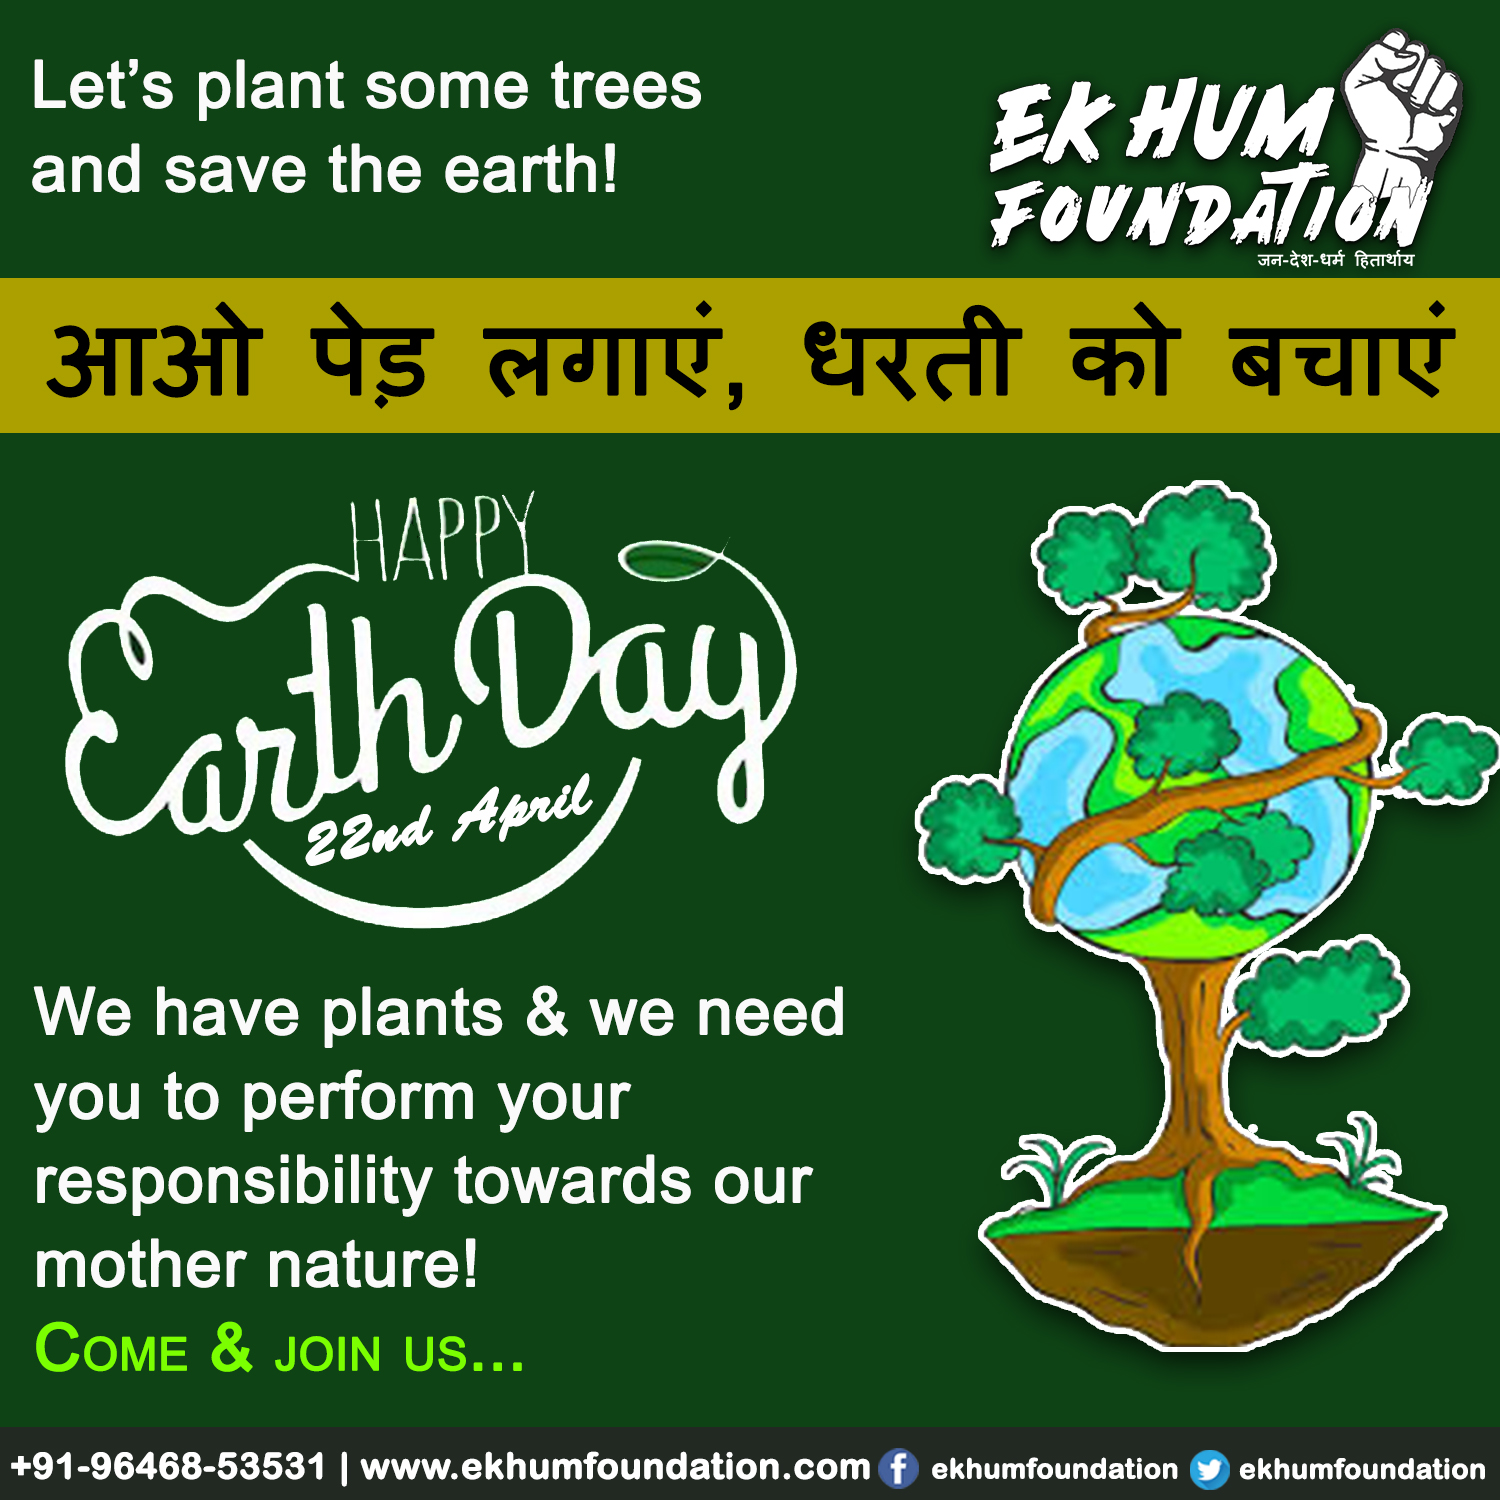 World Earth Day - Lets celebrate by planting trees